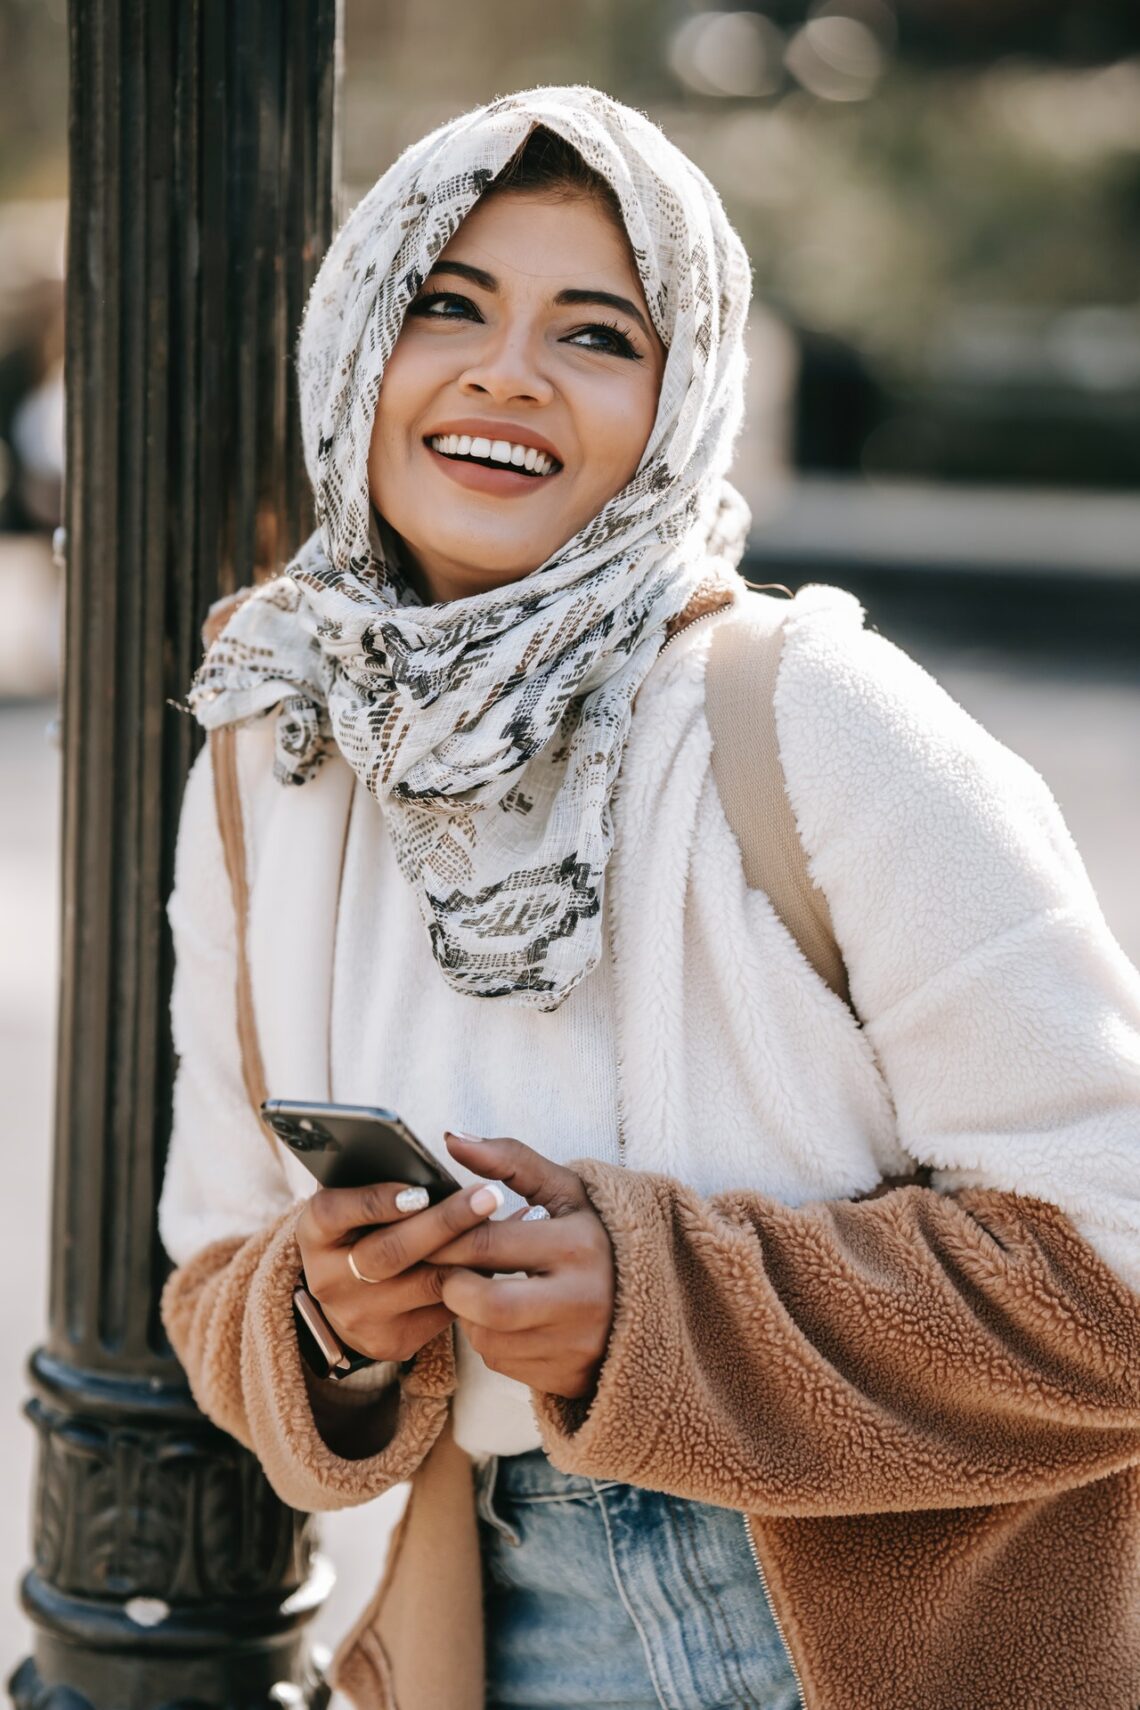 A Single Muslim Woman’s Guide to Living a Happy Life